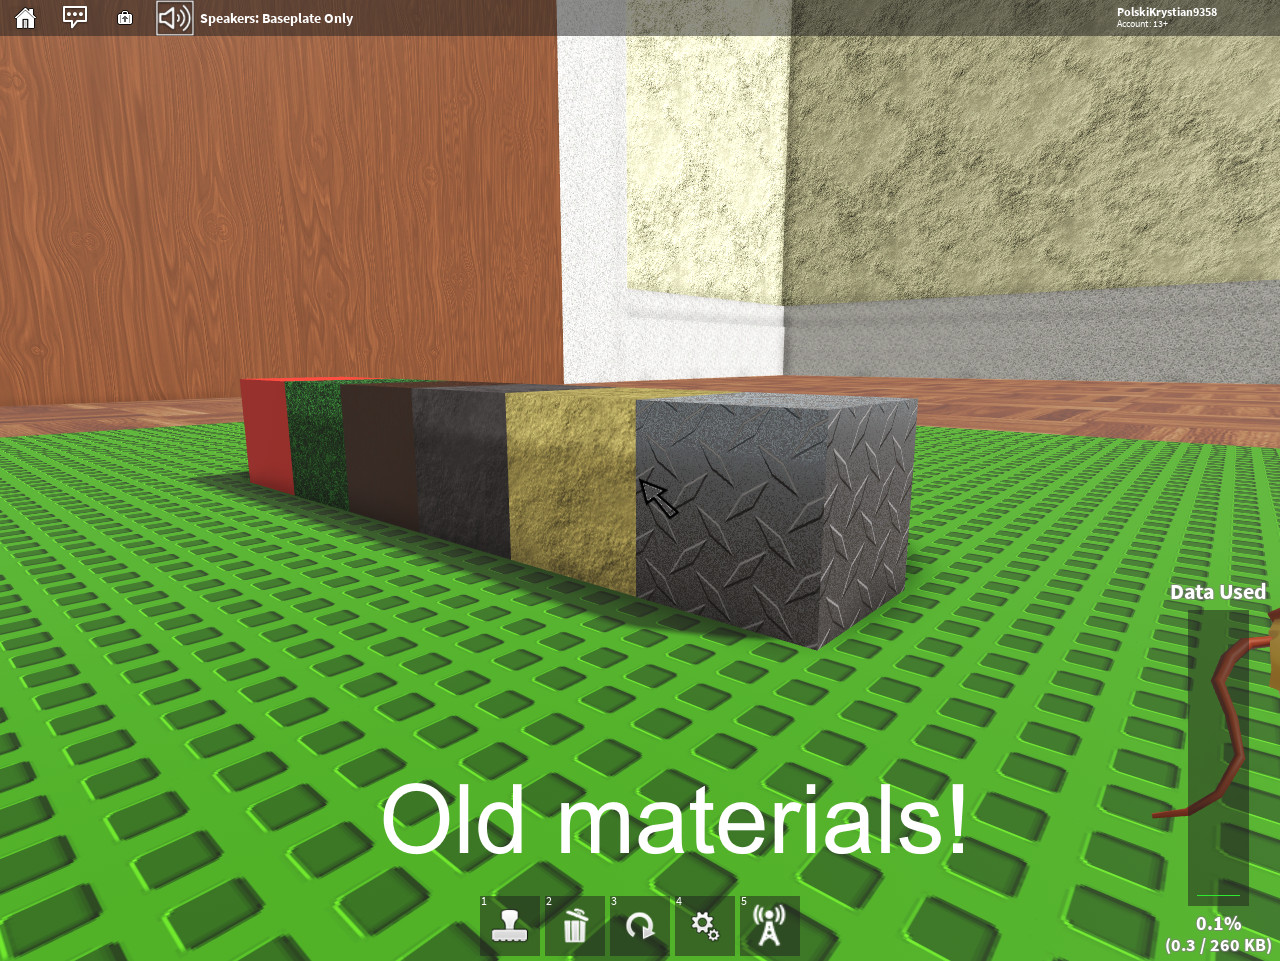 PC / Computer - Roblox - ROBLOX Egg Launcher 2017 - The Textures Resource